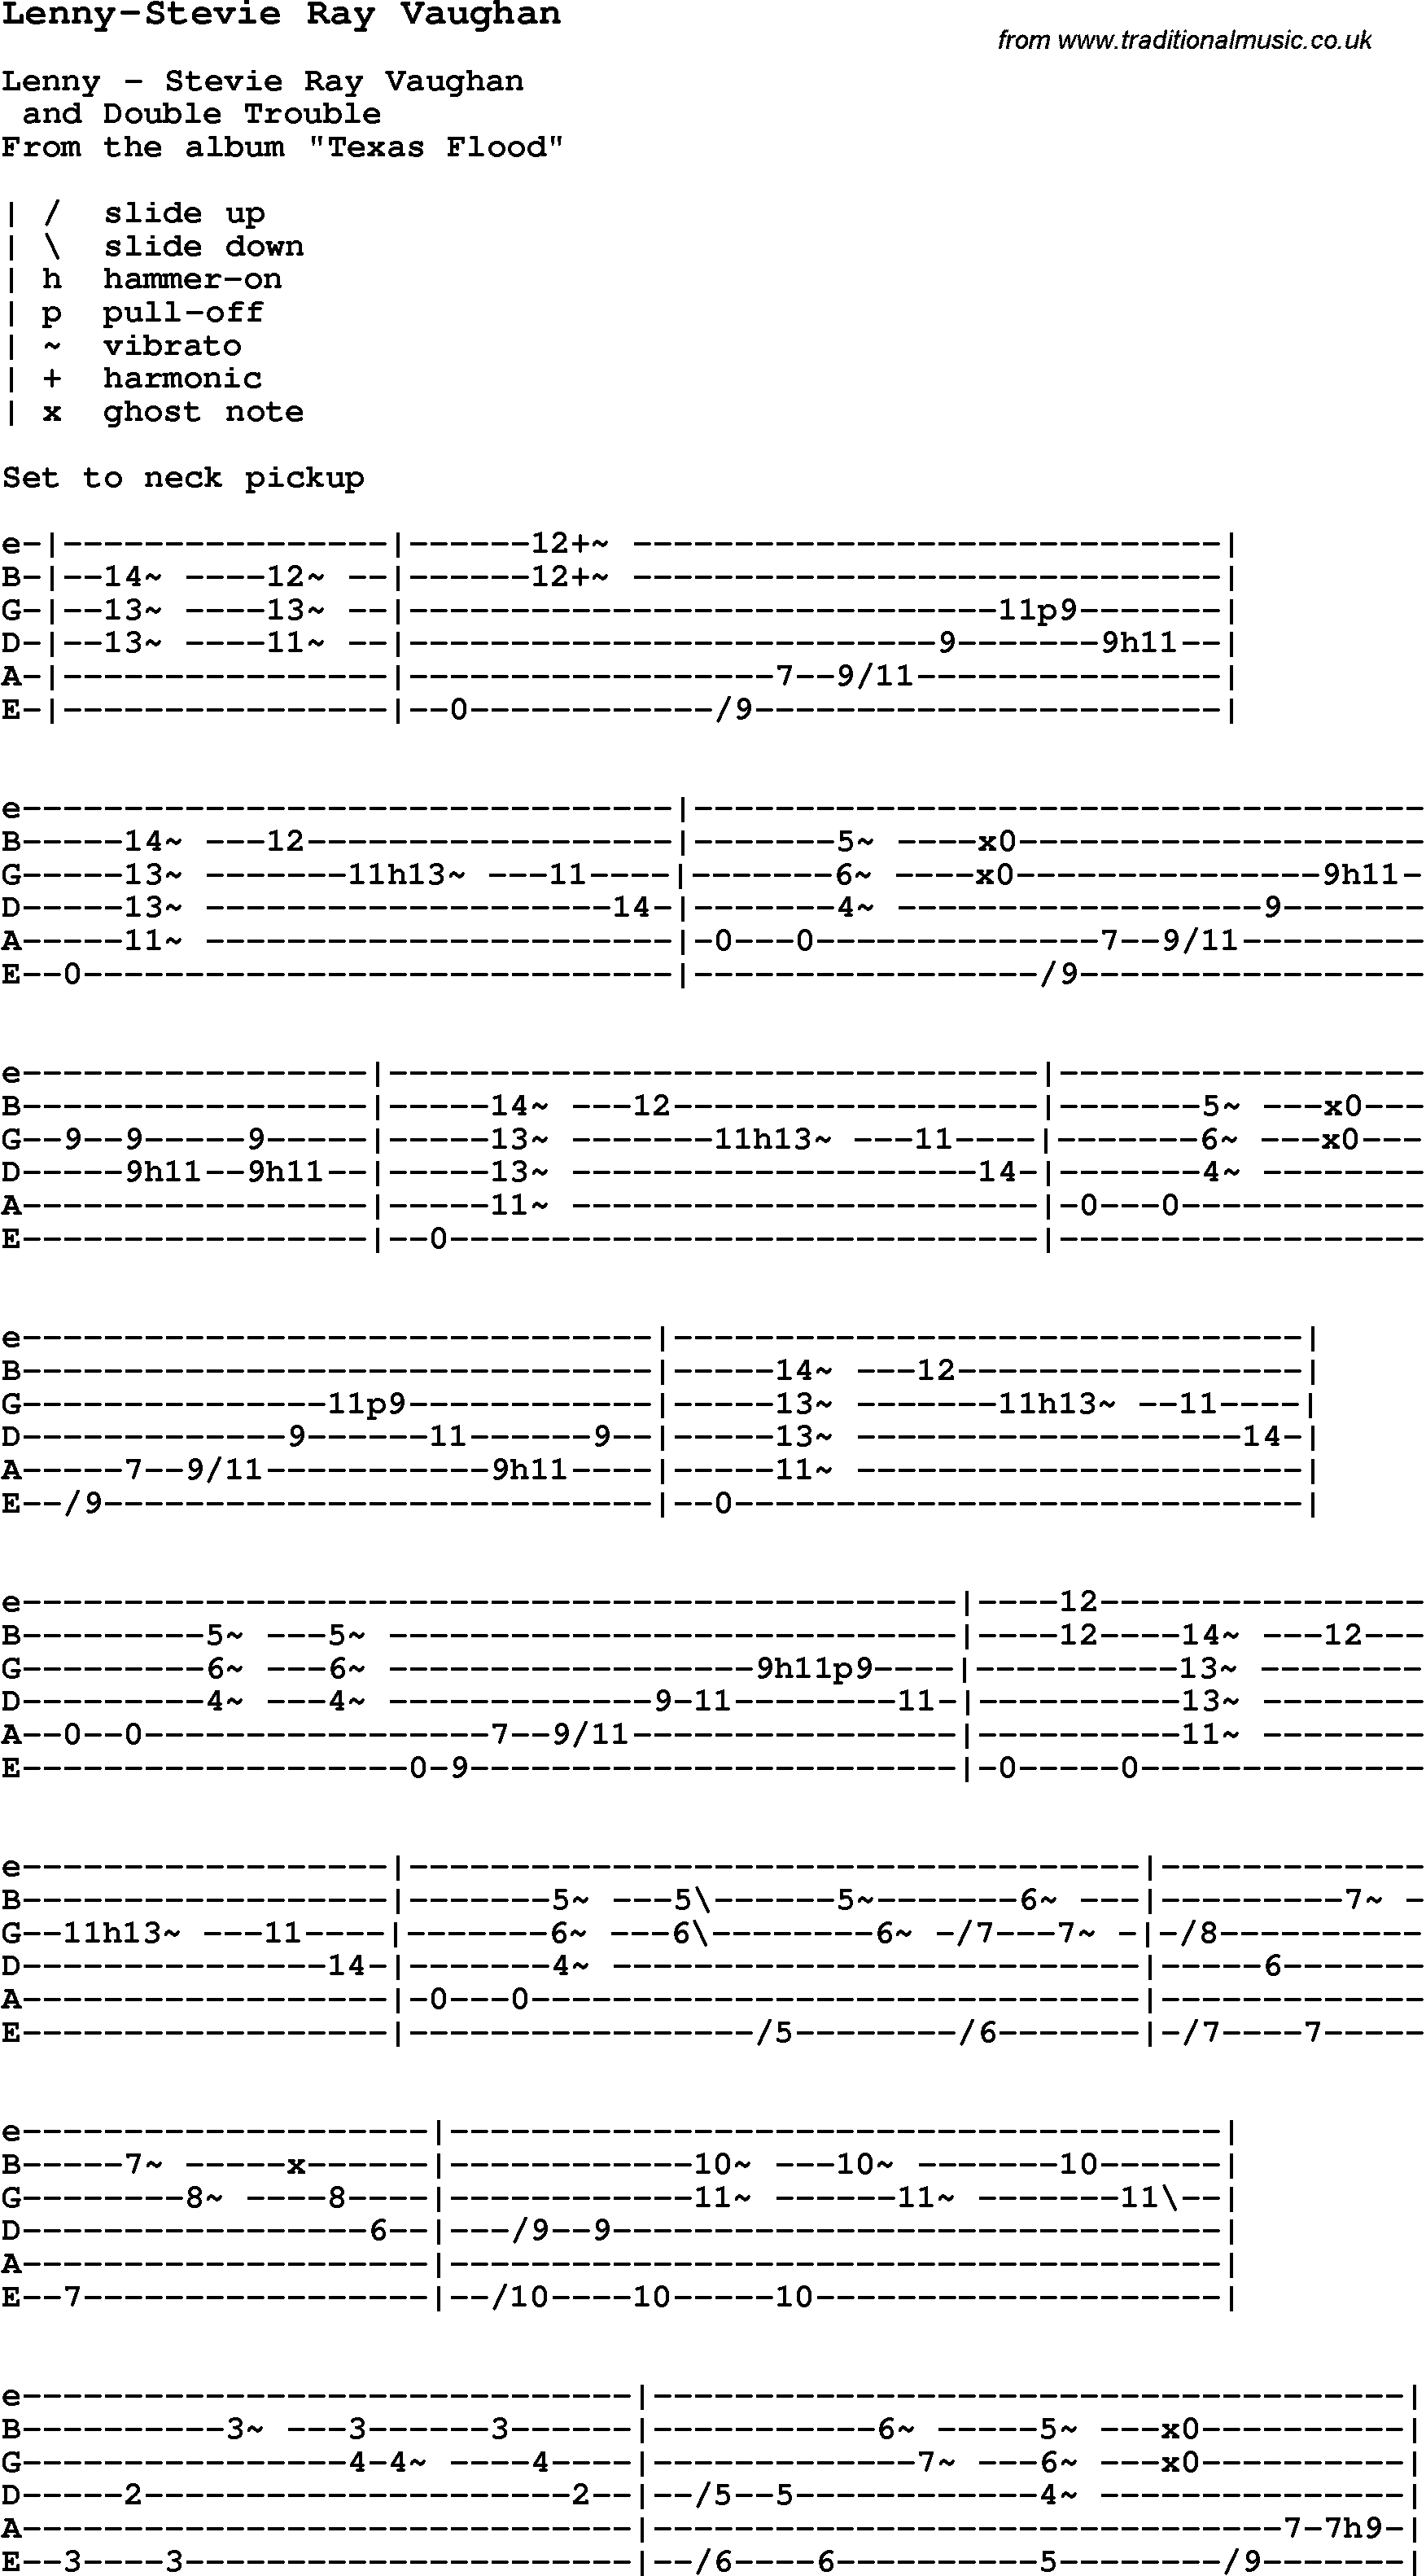 Blues Guitar Song, lyrics, chords, tablature, playing hints for Lenny-Stevie Ray Vaughan